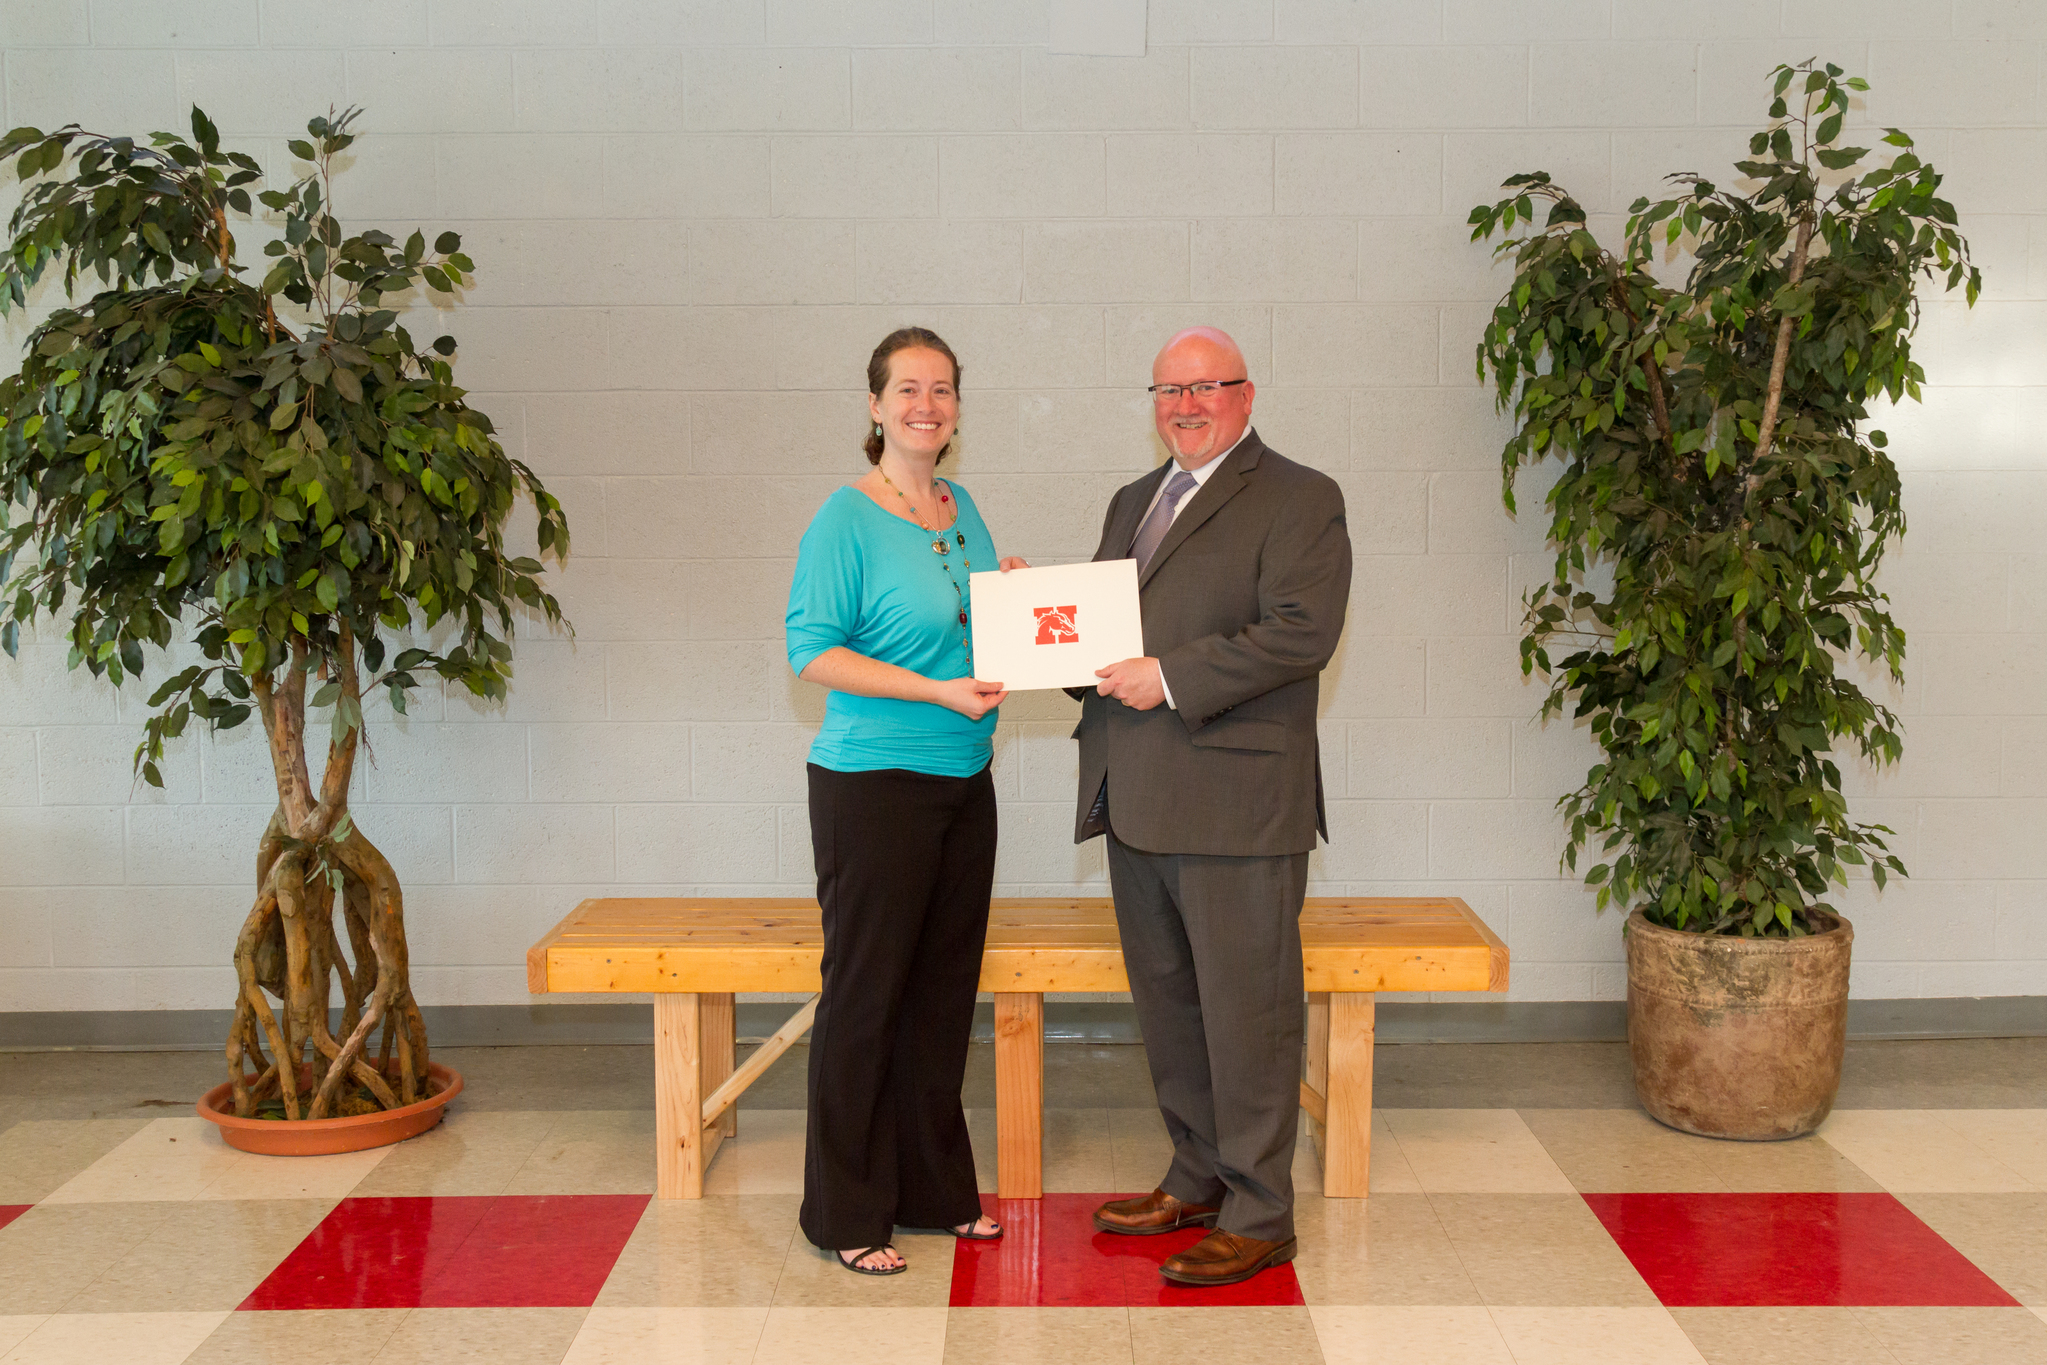 Ms. Jensen and the Board President holding award